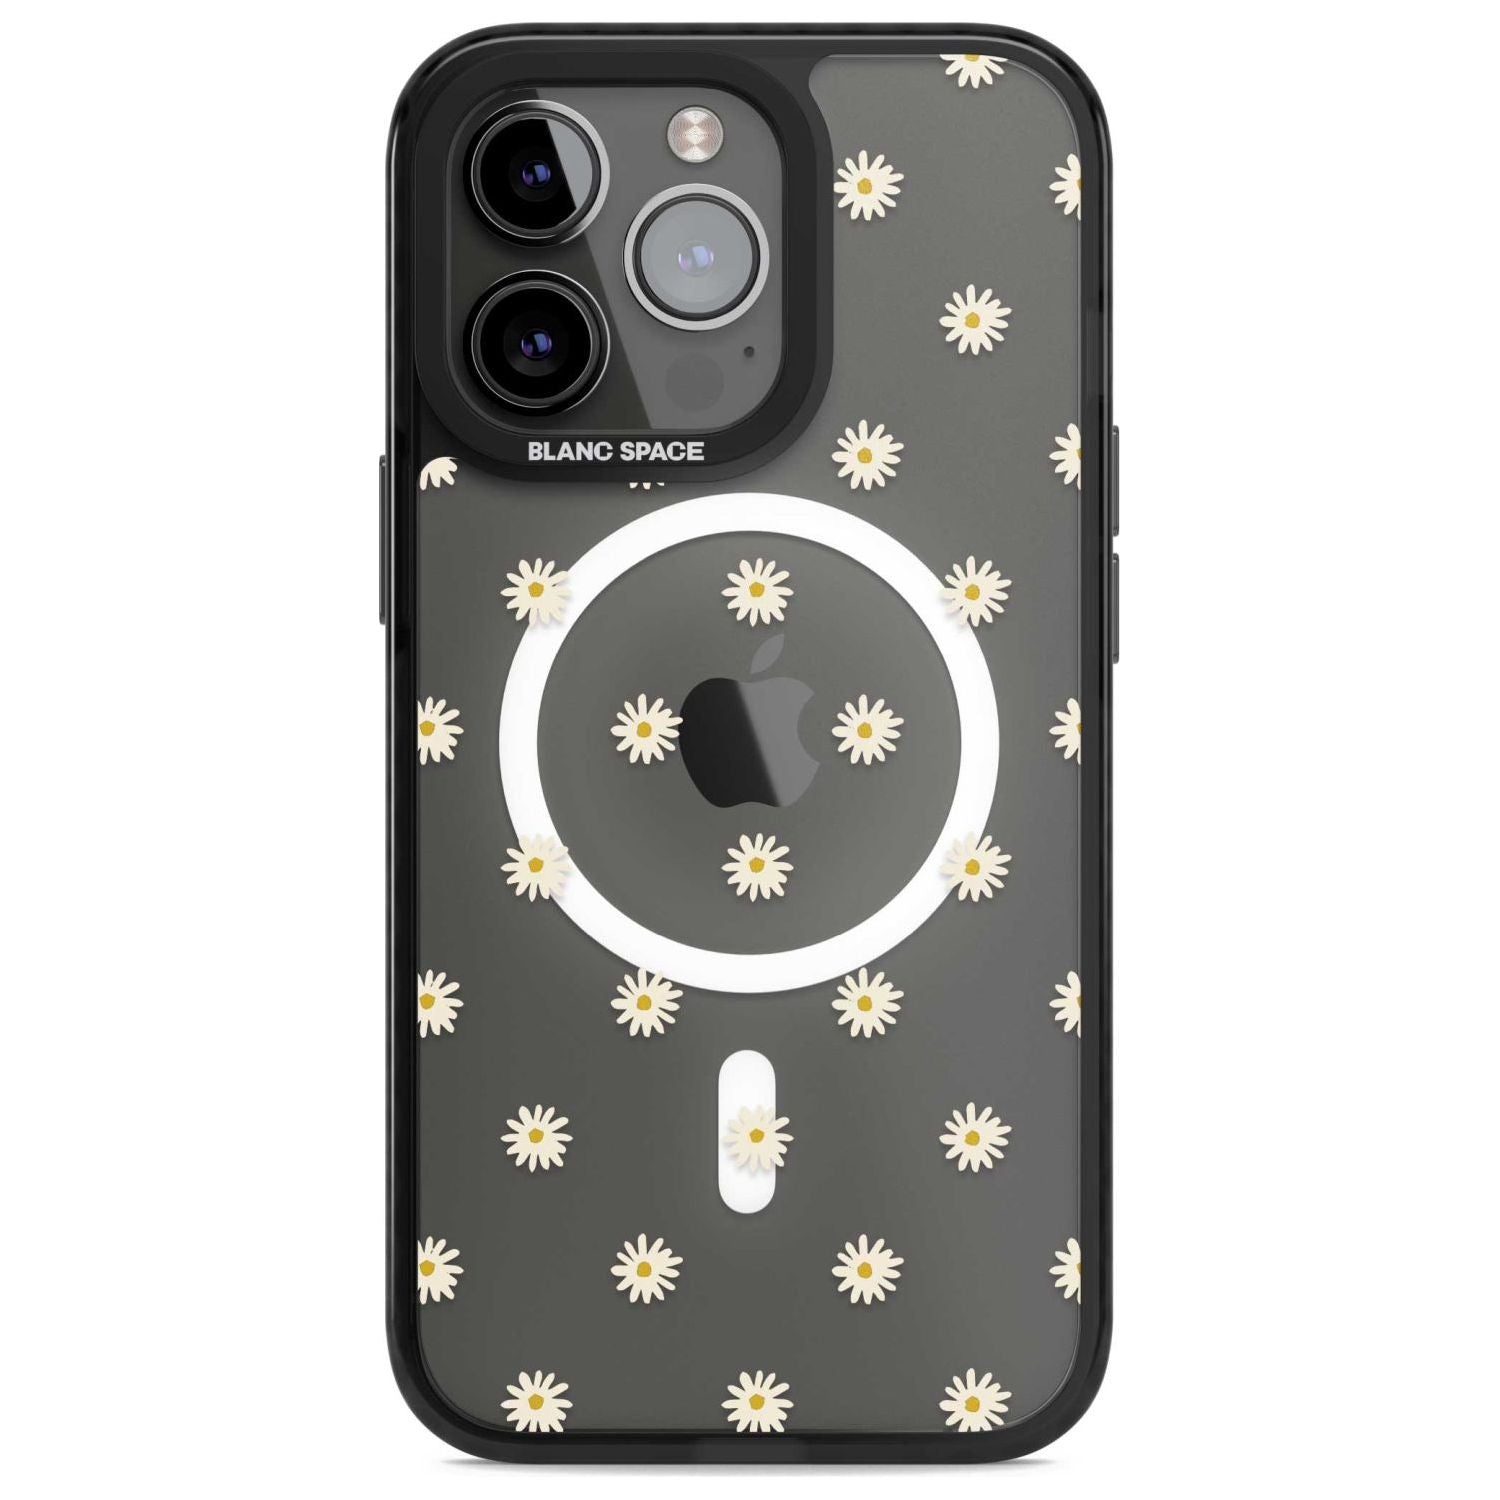 Daisy Pattern Transparent Cute Floral Phone Case iPhone 15 Pro Max / Magsafe Black Impact Case,iPhone 15 Pro / Magsafe Black Impact Case,iPhone 14 Pro Max / Magsafe Black Impact Case,iPhone 14 Pro / Magsafe Black Impact Case,iPhone 13 Pro / Magsafe Black Impact Case Blanc Space